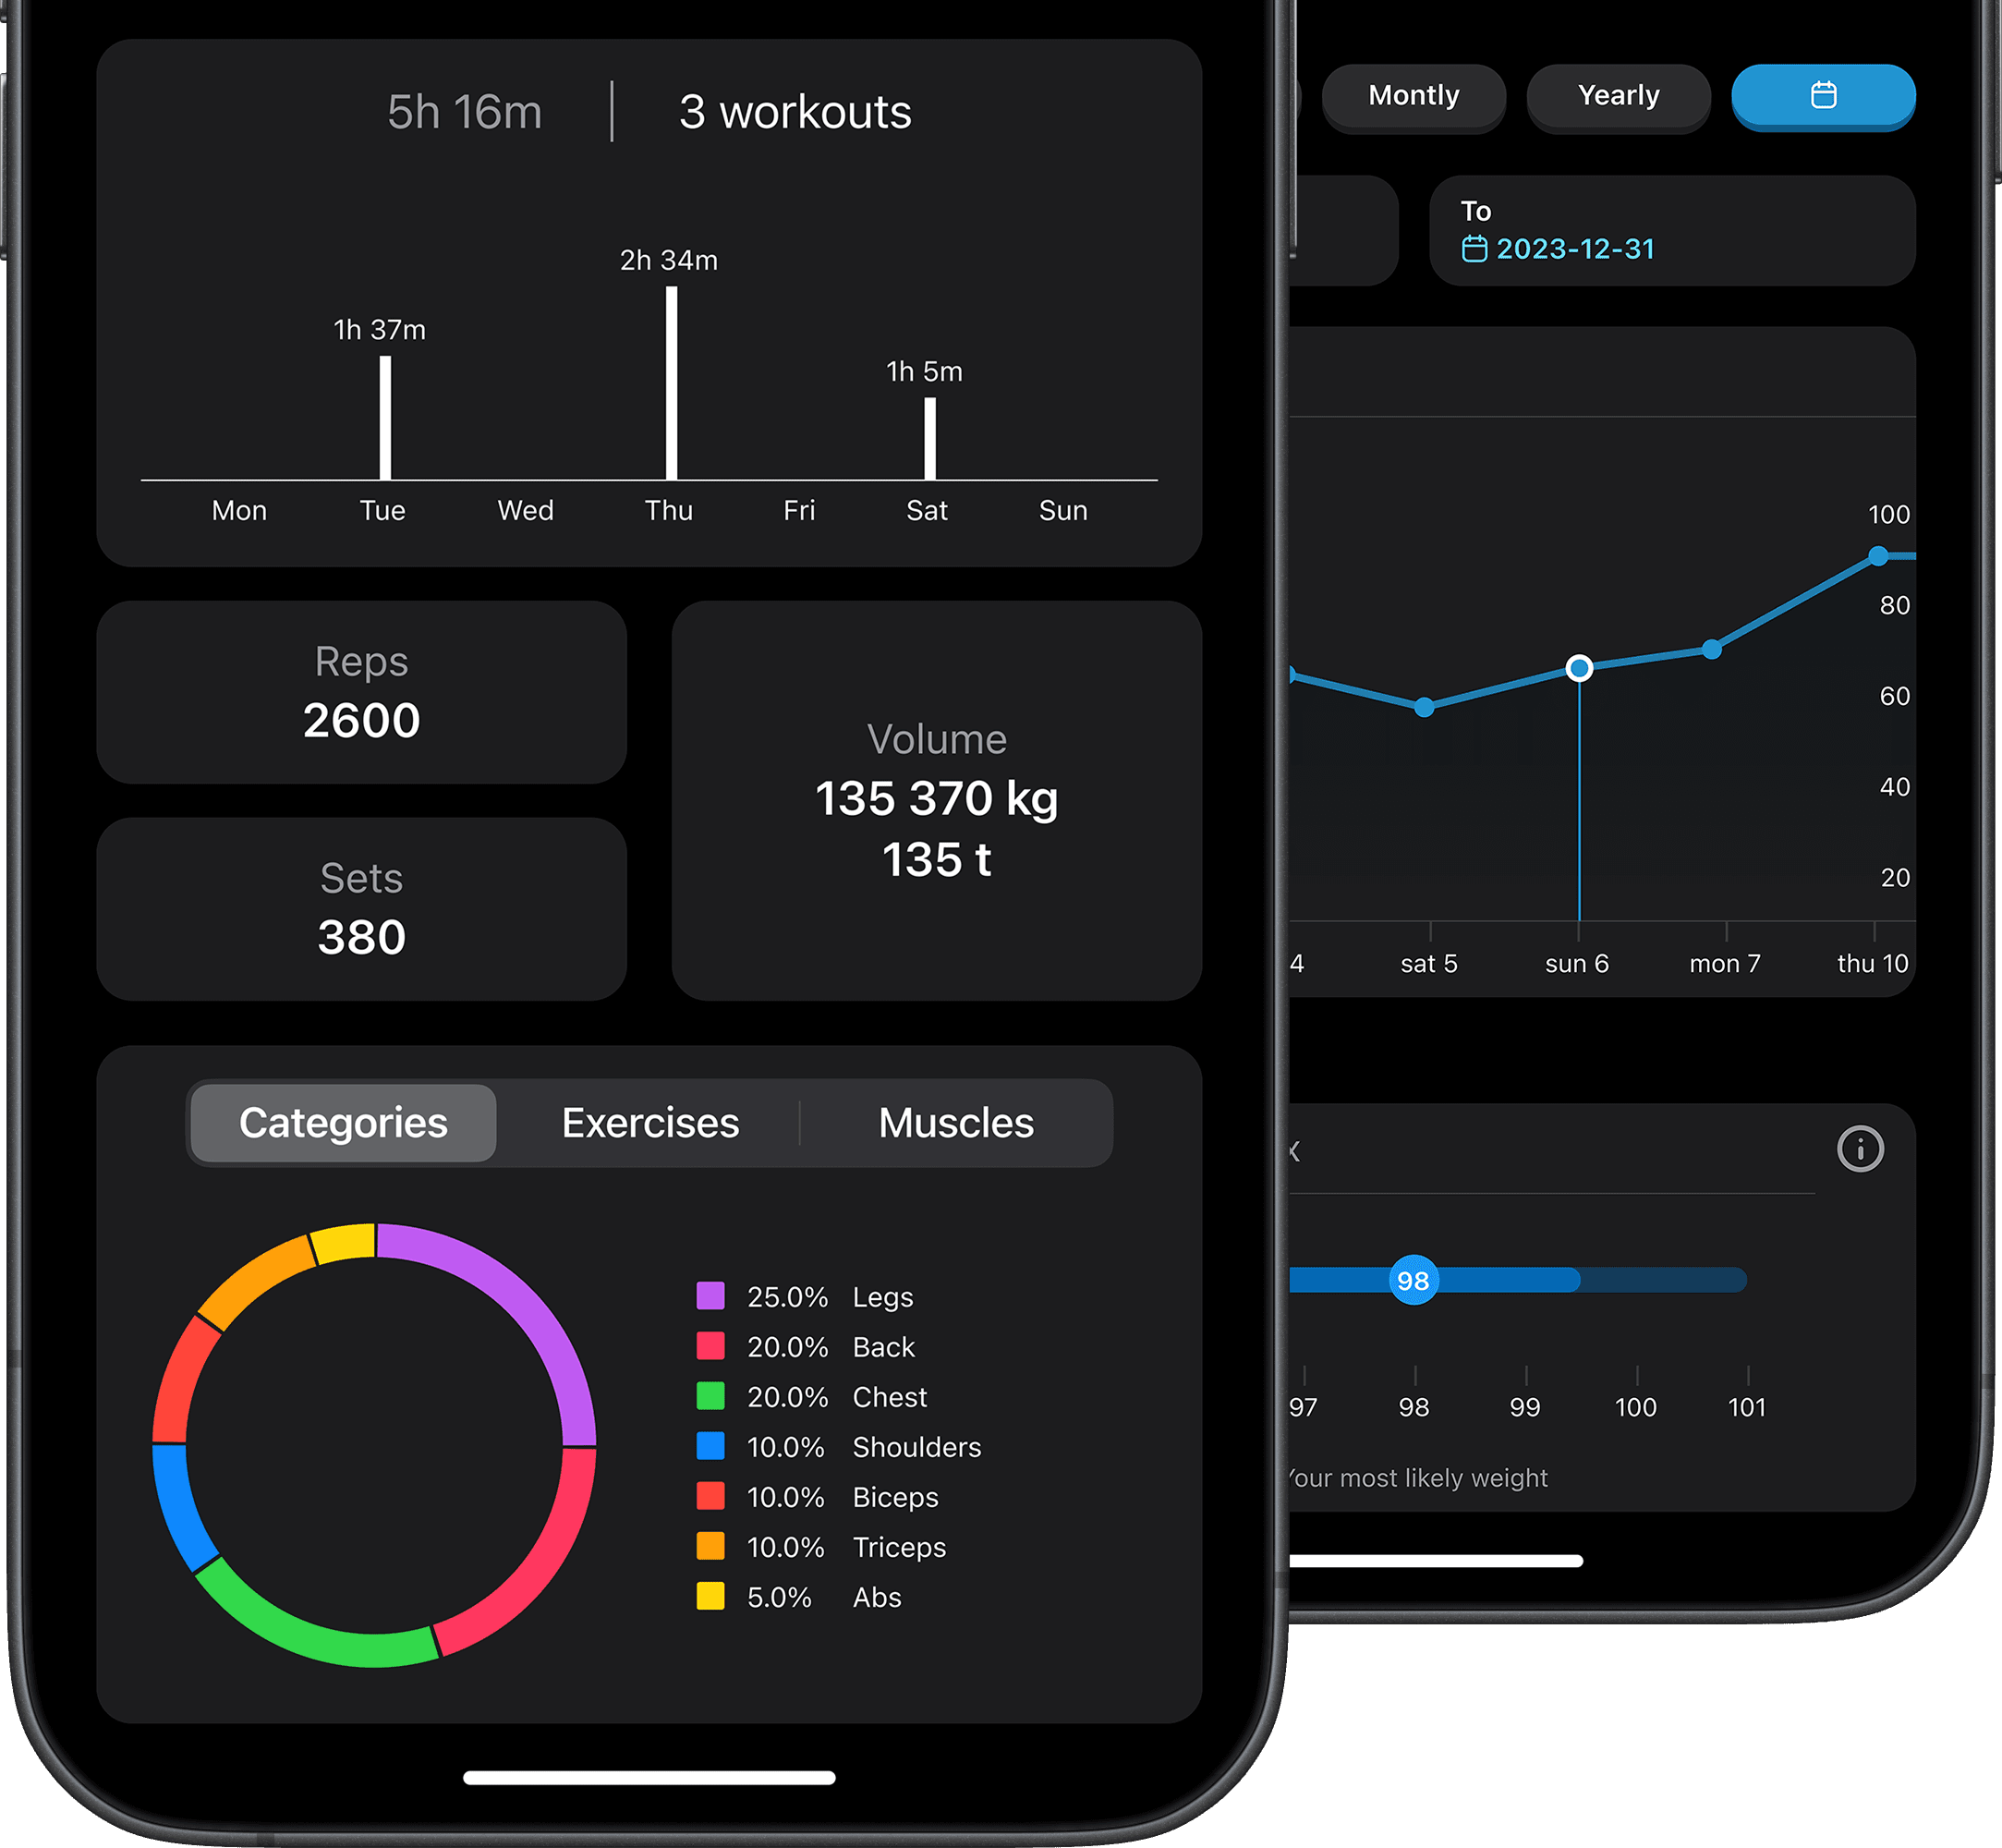 iPhone displaying the statistics screen in the Wlogr app, which shows reps, sets, muscle- and exercise distribution and more for a given time period.